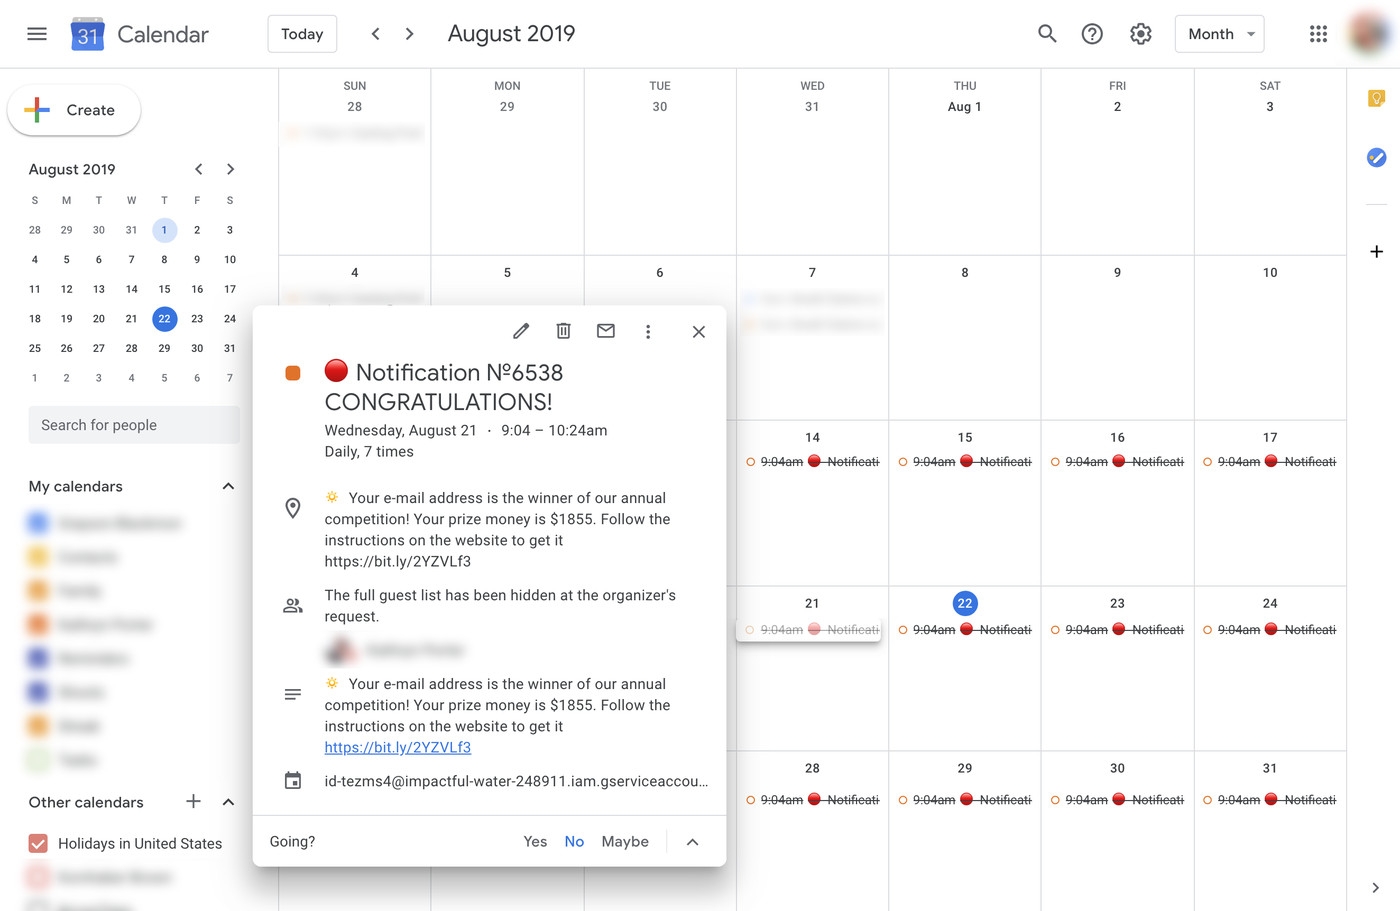 How To Keep Spam From Invading Your Google Calendar - The Verge